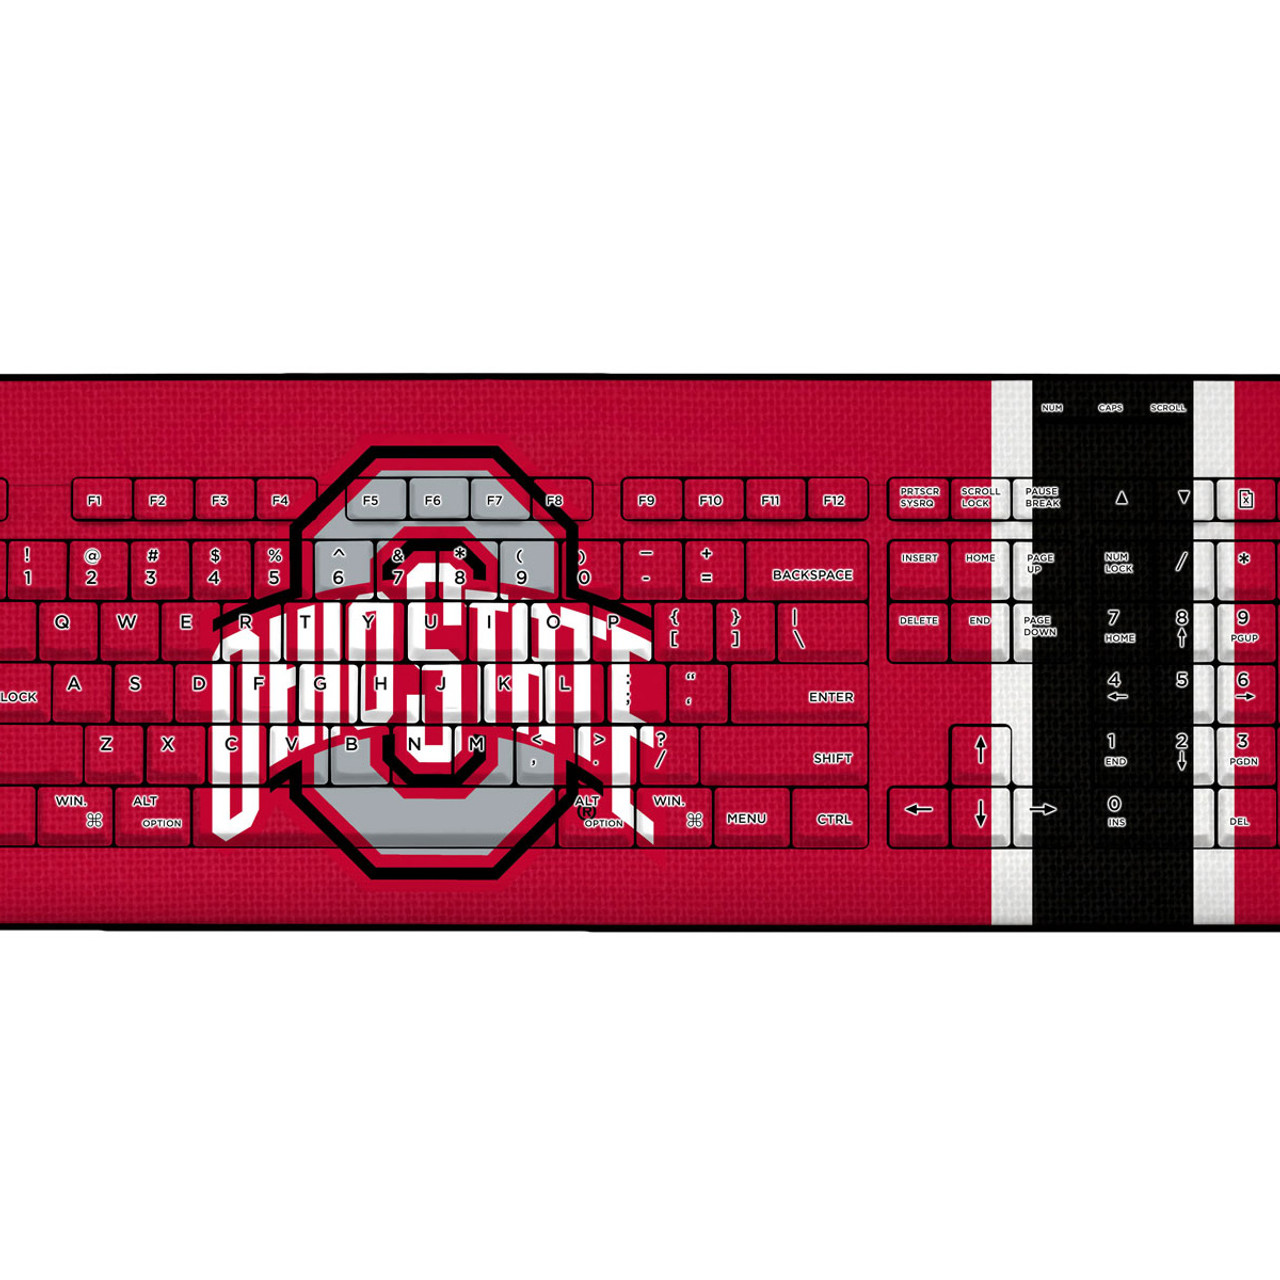 Osu – Its for my school project